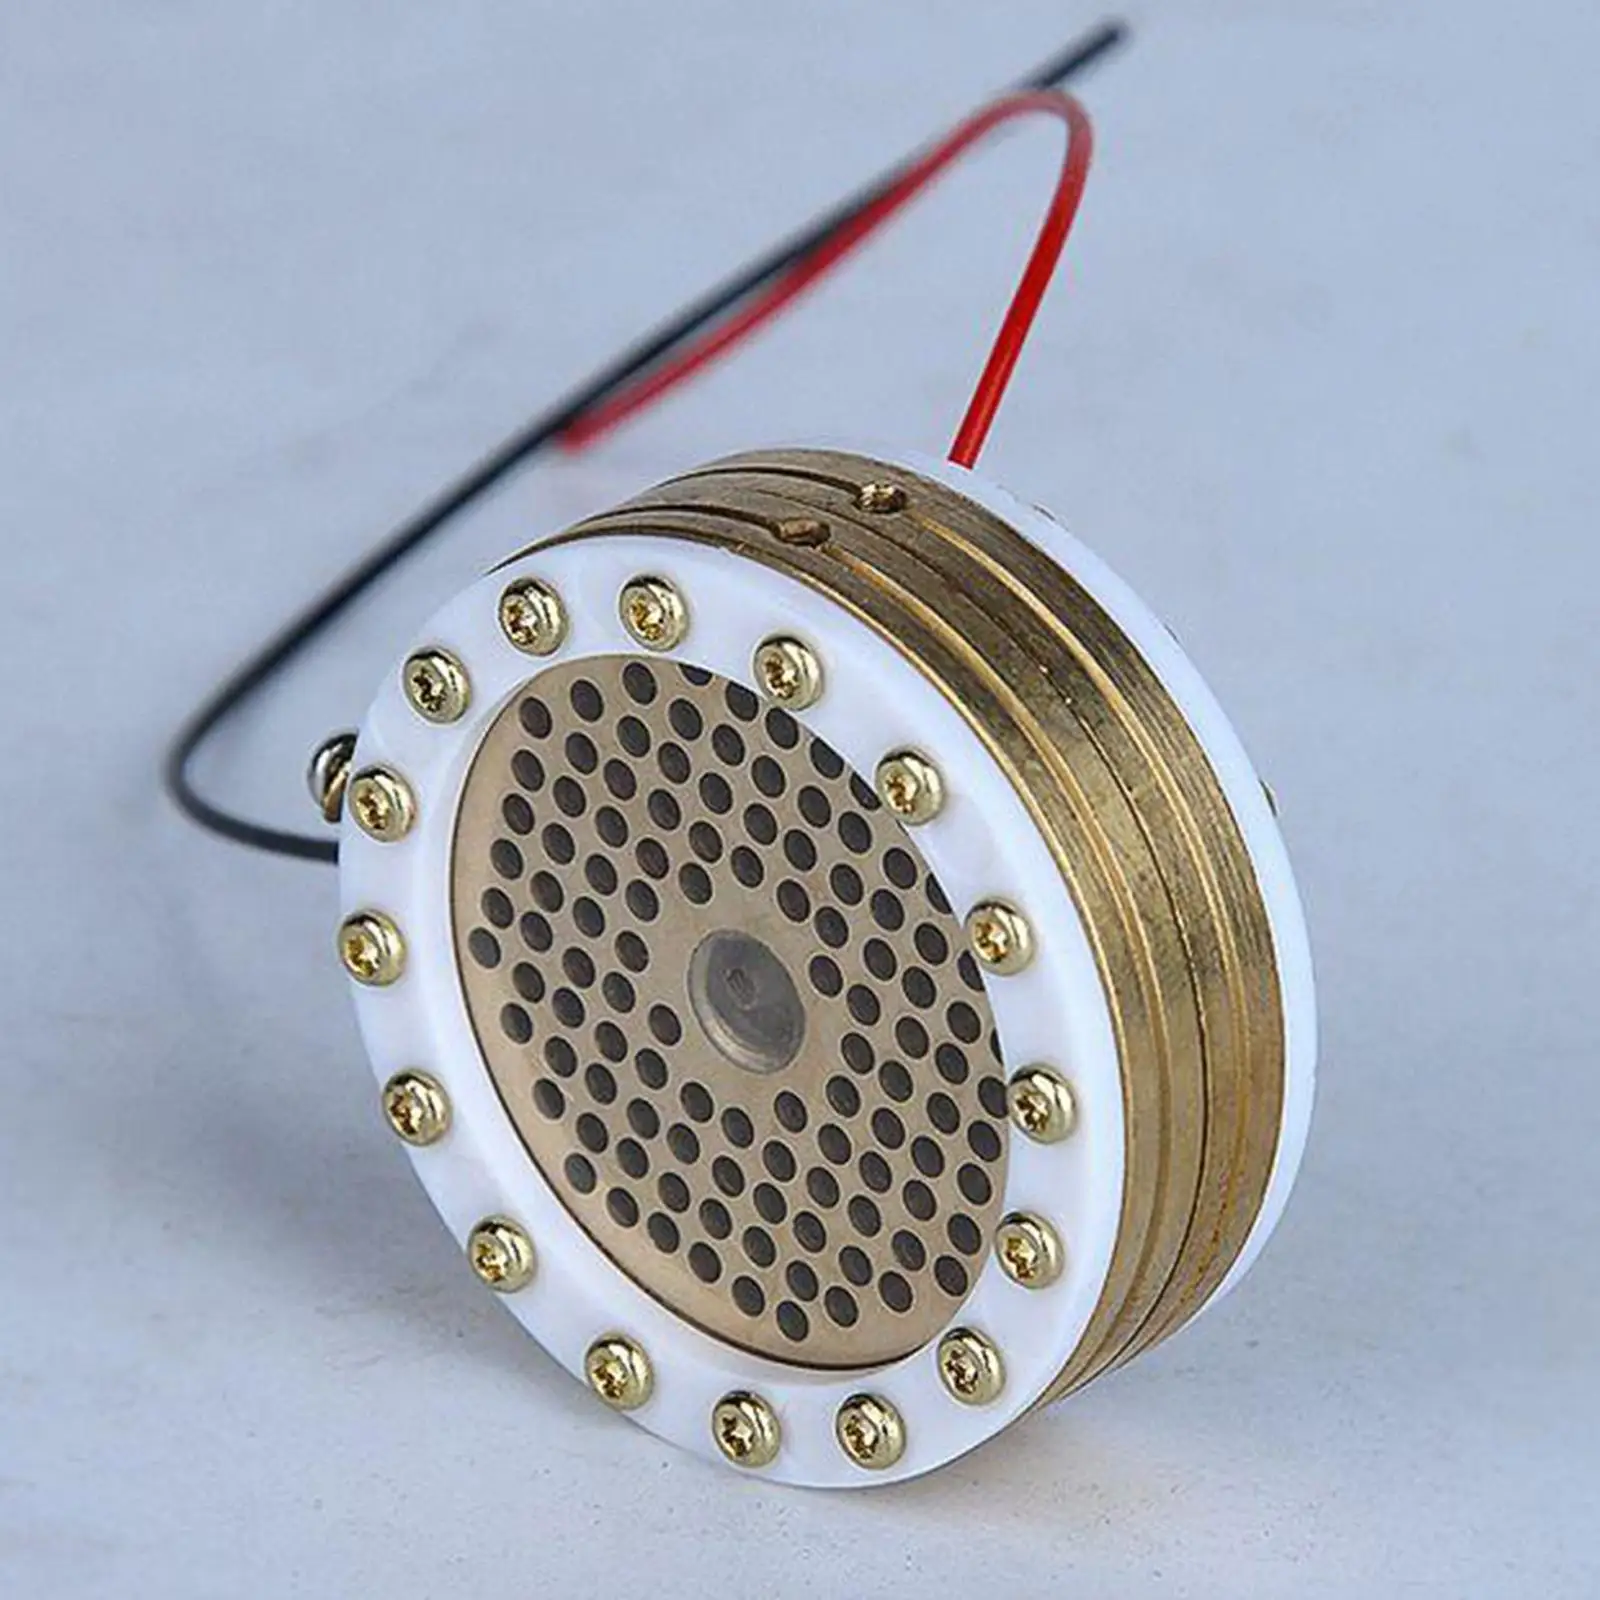 34mm/1.33 inch Capsule Large Diaphragm Condenser Microphone Capsule Single Sided Gold Plated for Professional Recording